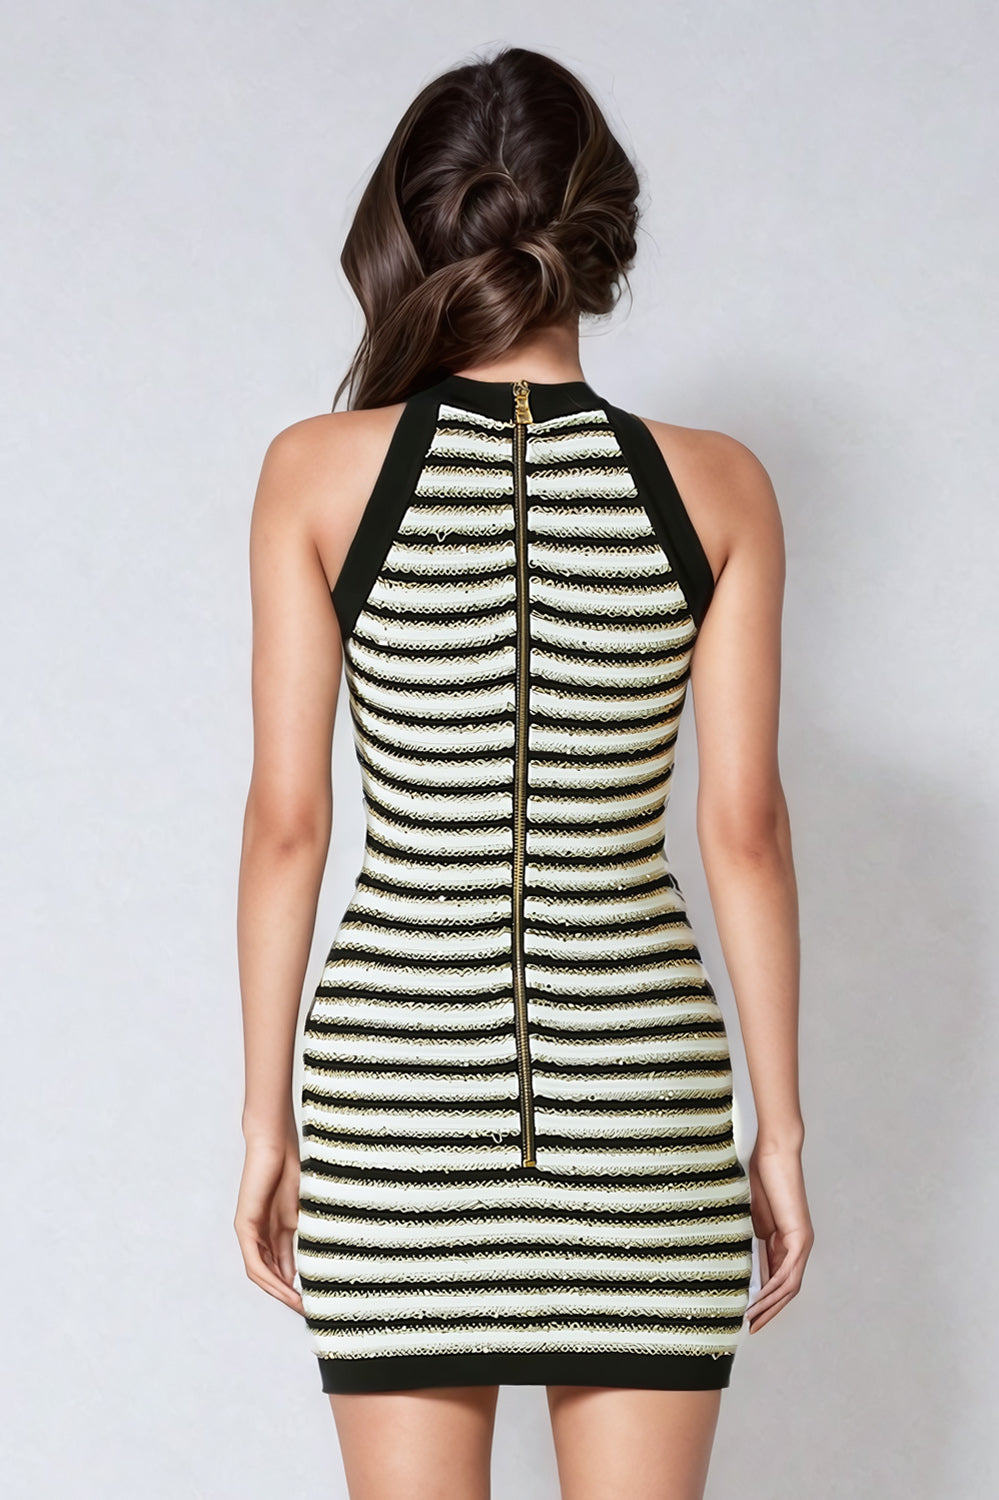 Sophisticated Mini Dress with Gold Accents - Black & White